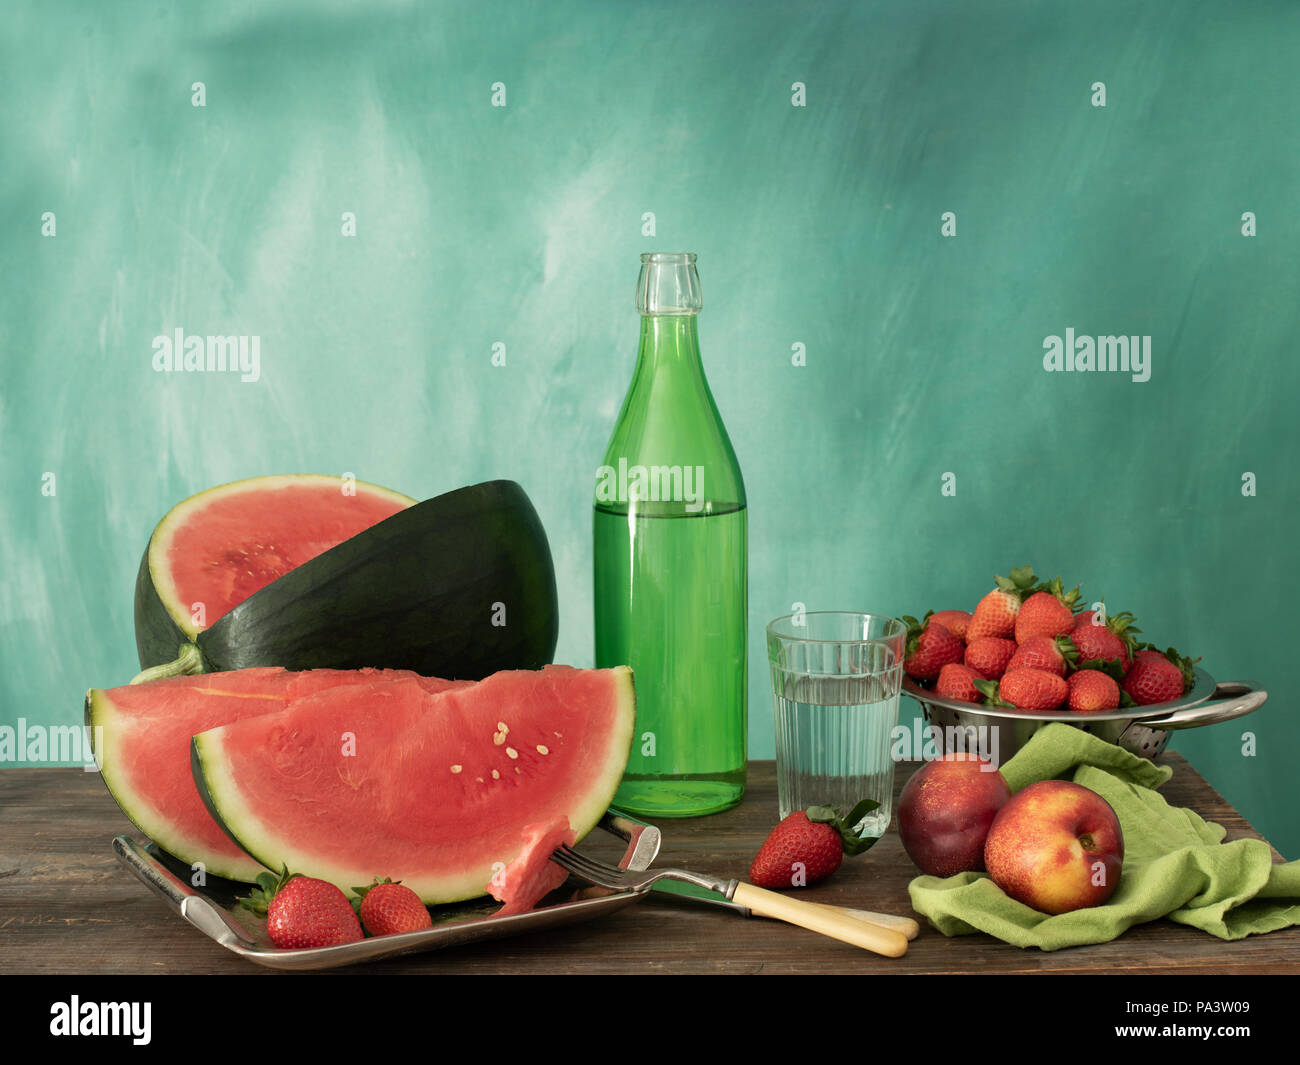 still life with watermelon, nectarines, strawberries, with a bottle of water Stock Photo